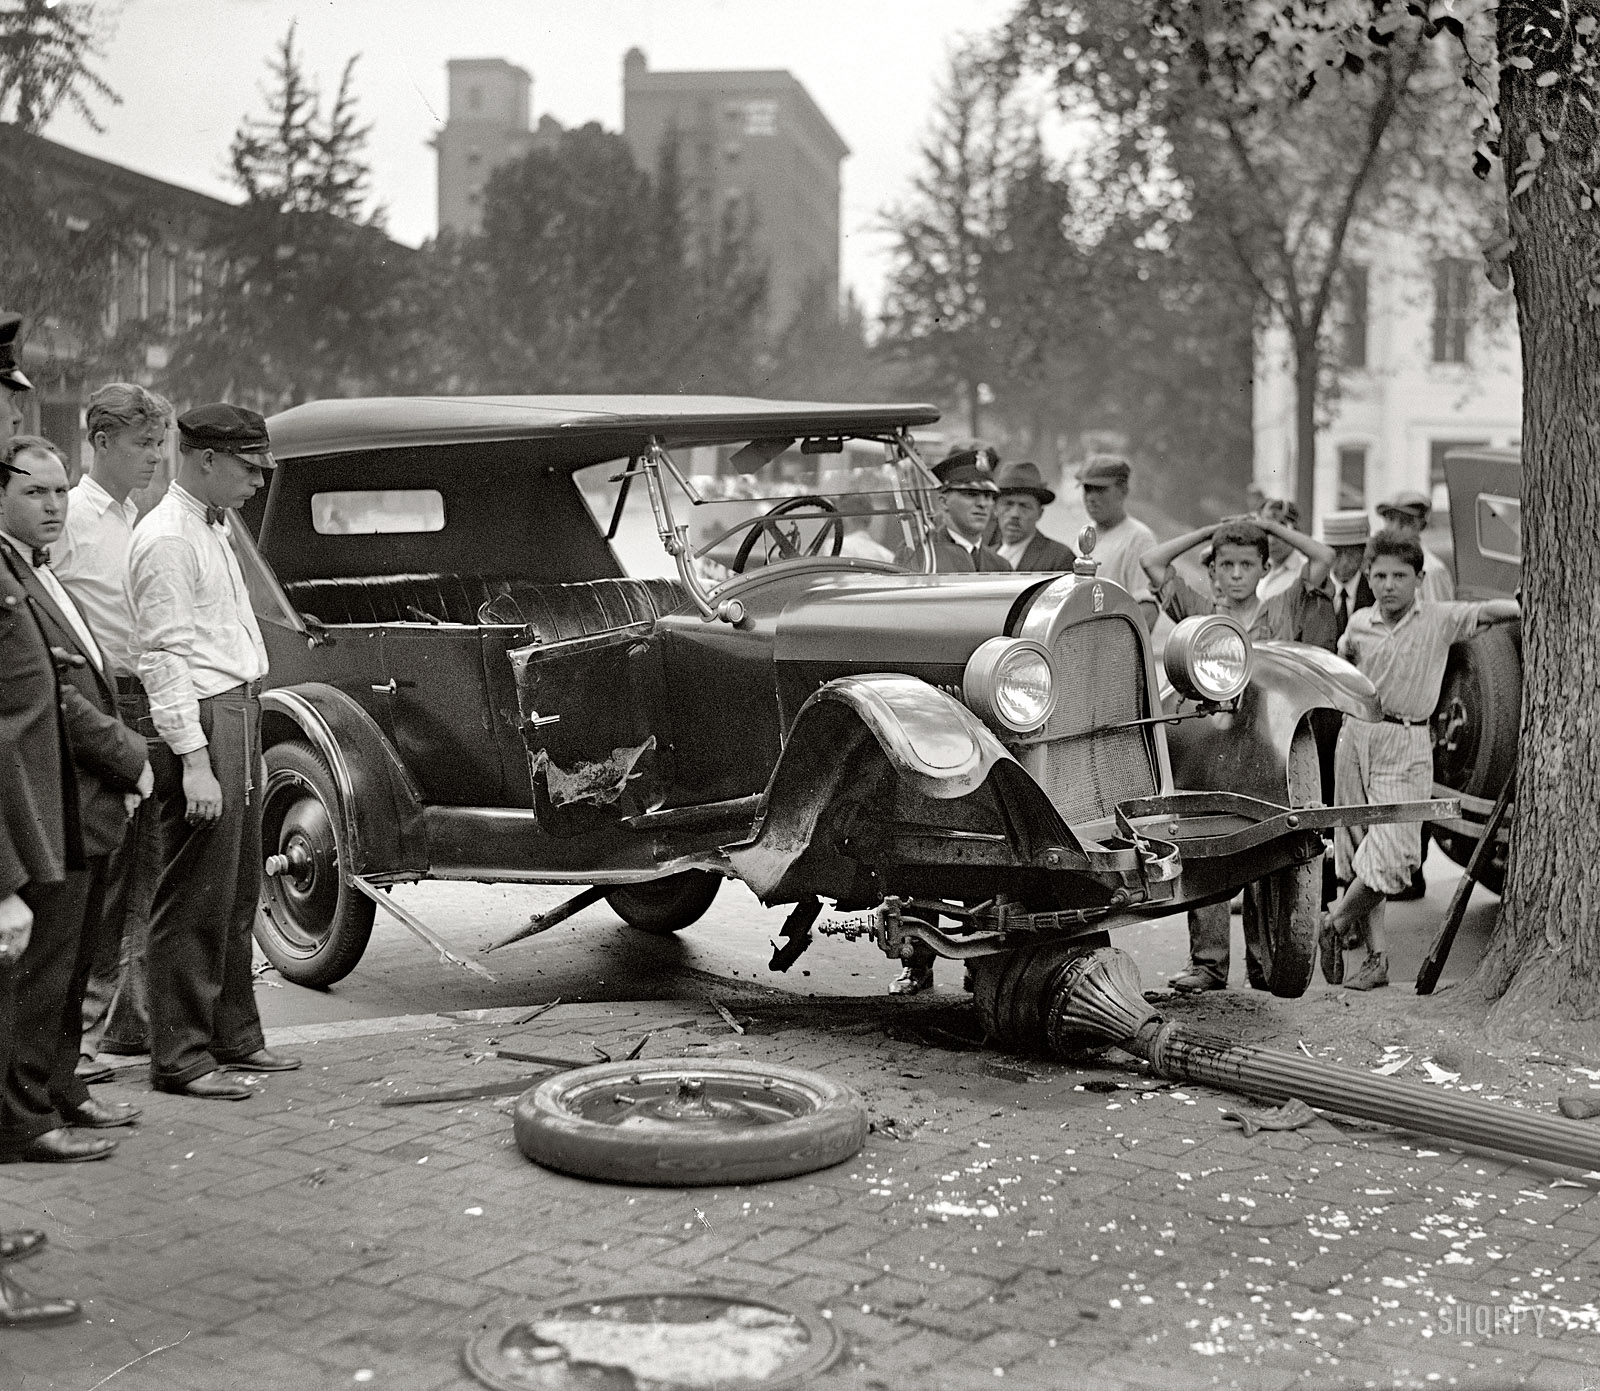 Washington, D.C., circa 1926. "Auto accident." With no shortage of witnesses. National Photo Company Collection glass negative. View full size.